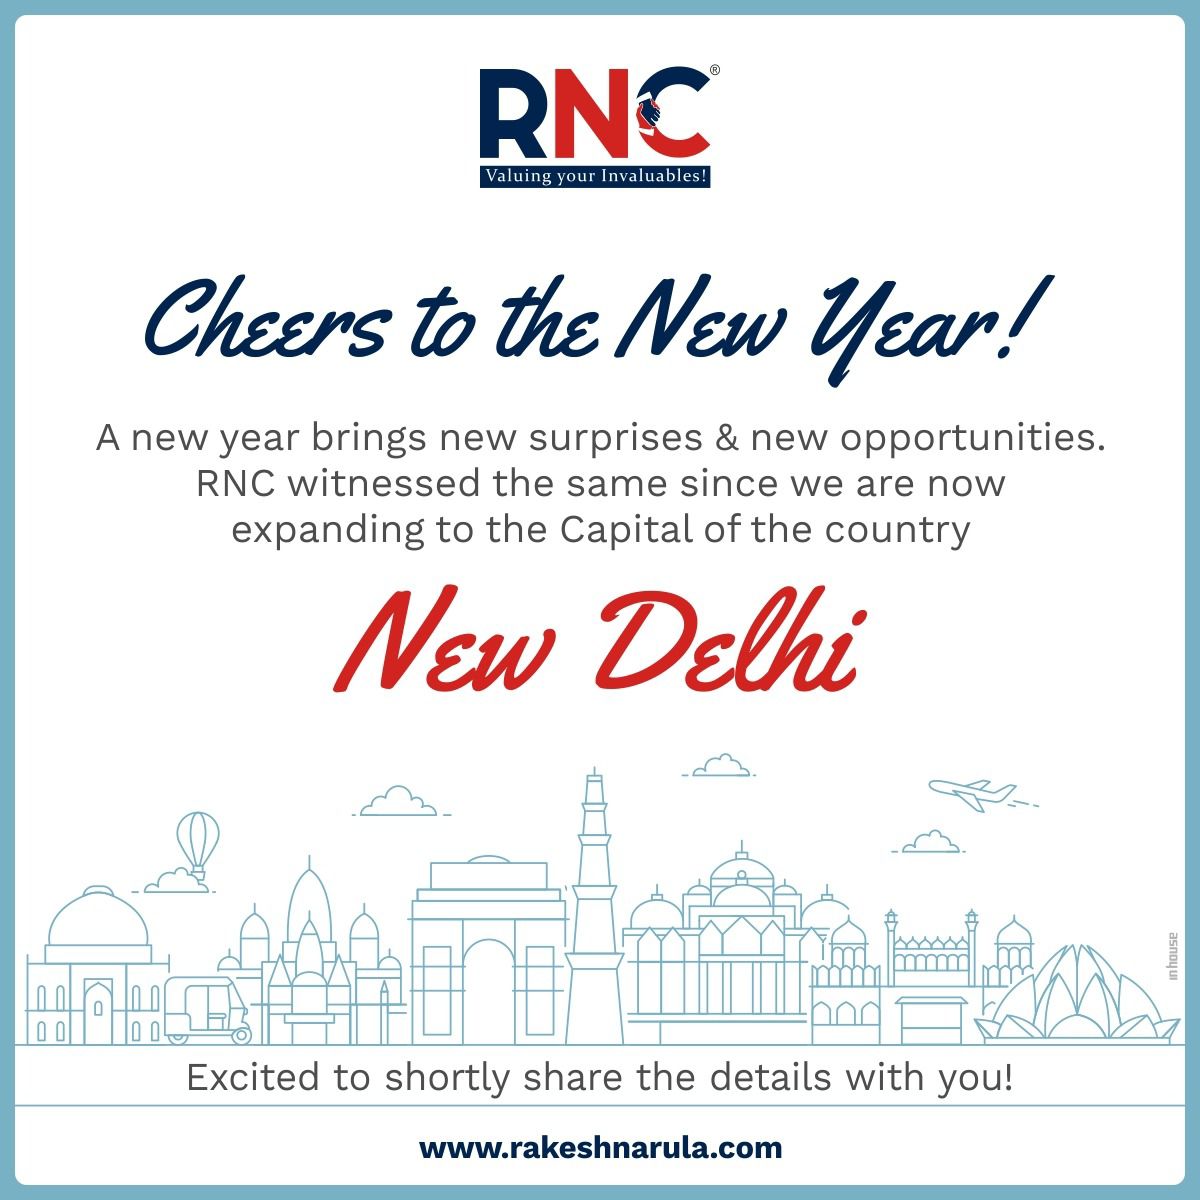 RNC is expanding presence in the Delhi NCR region - RNC